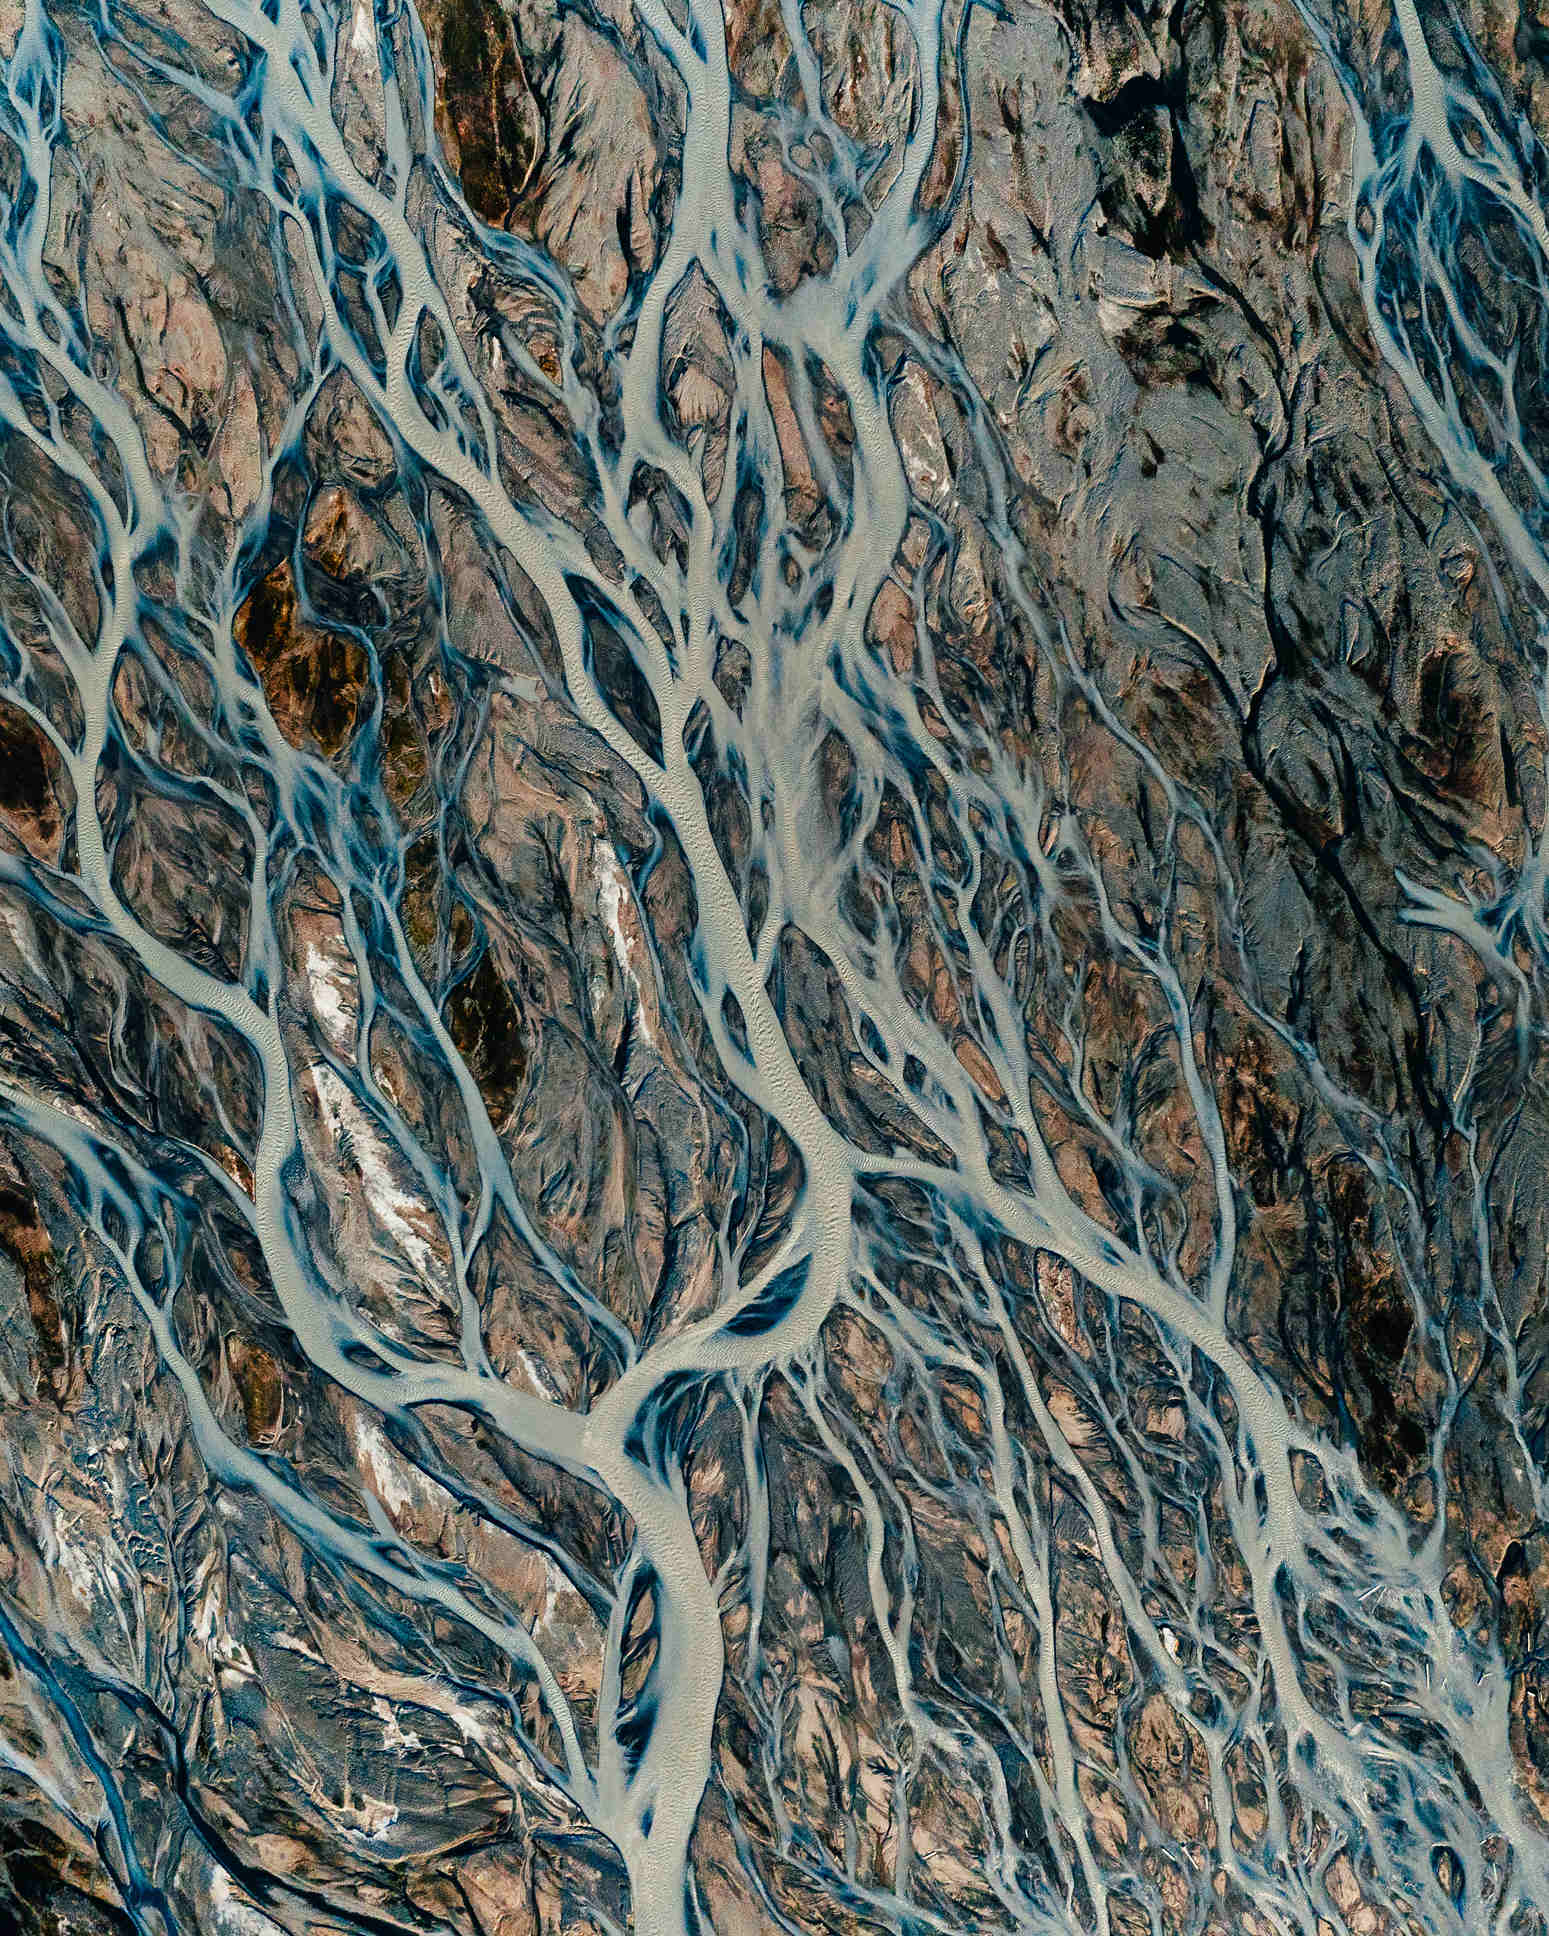 Aerial view of a braided river